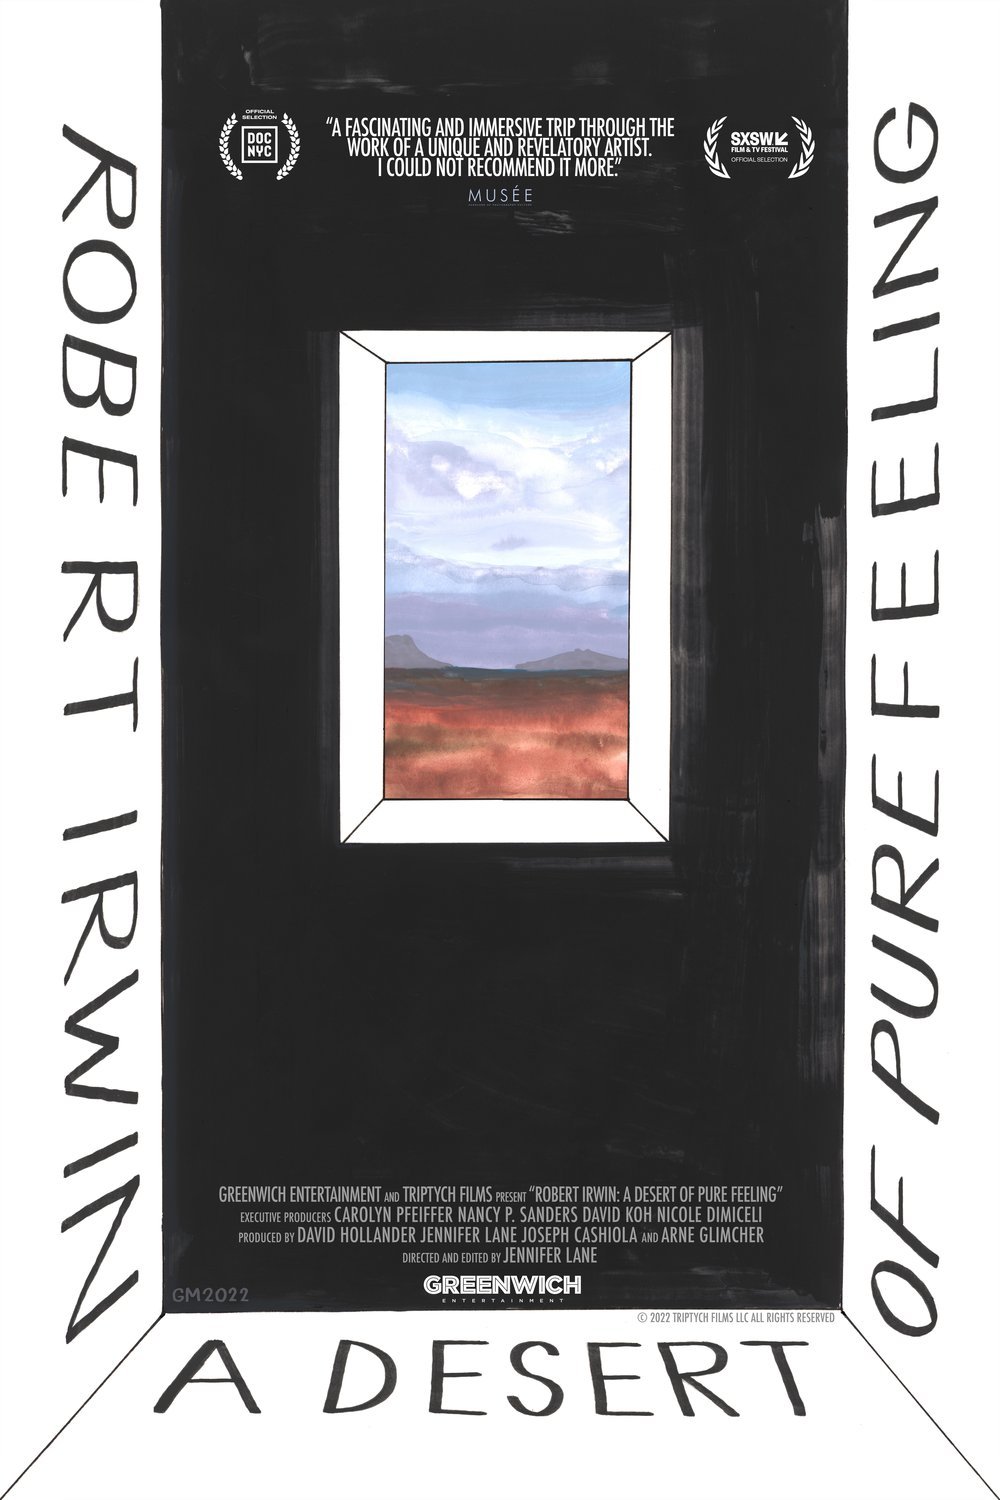 Poster of the movie Robert Irwin: A Desert of Pure Feeling